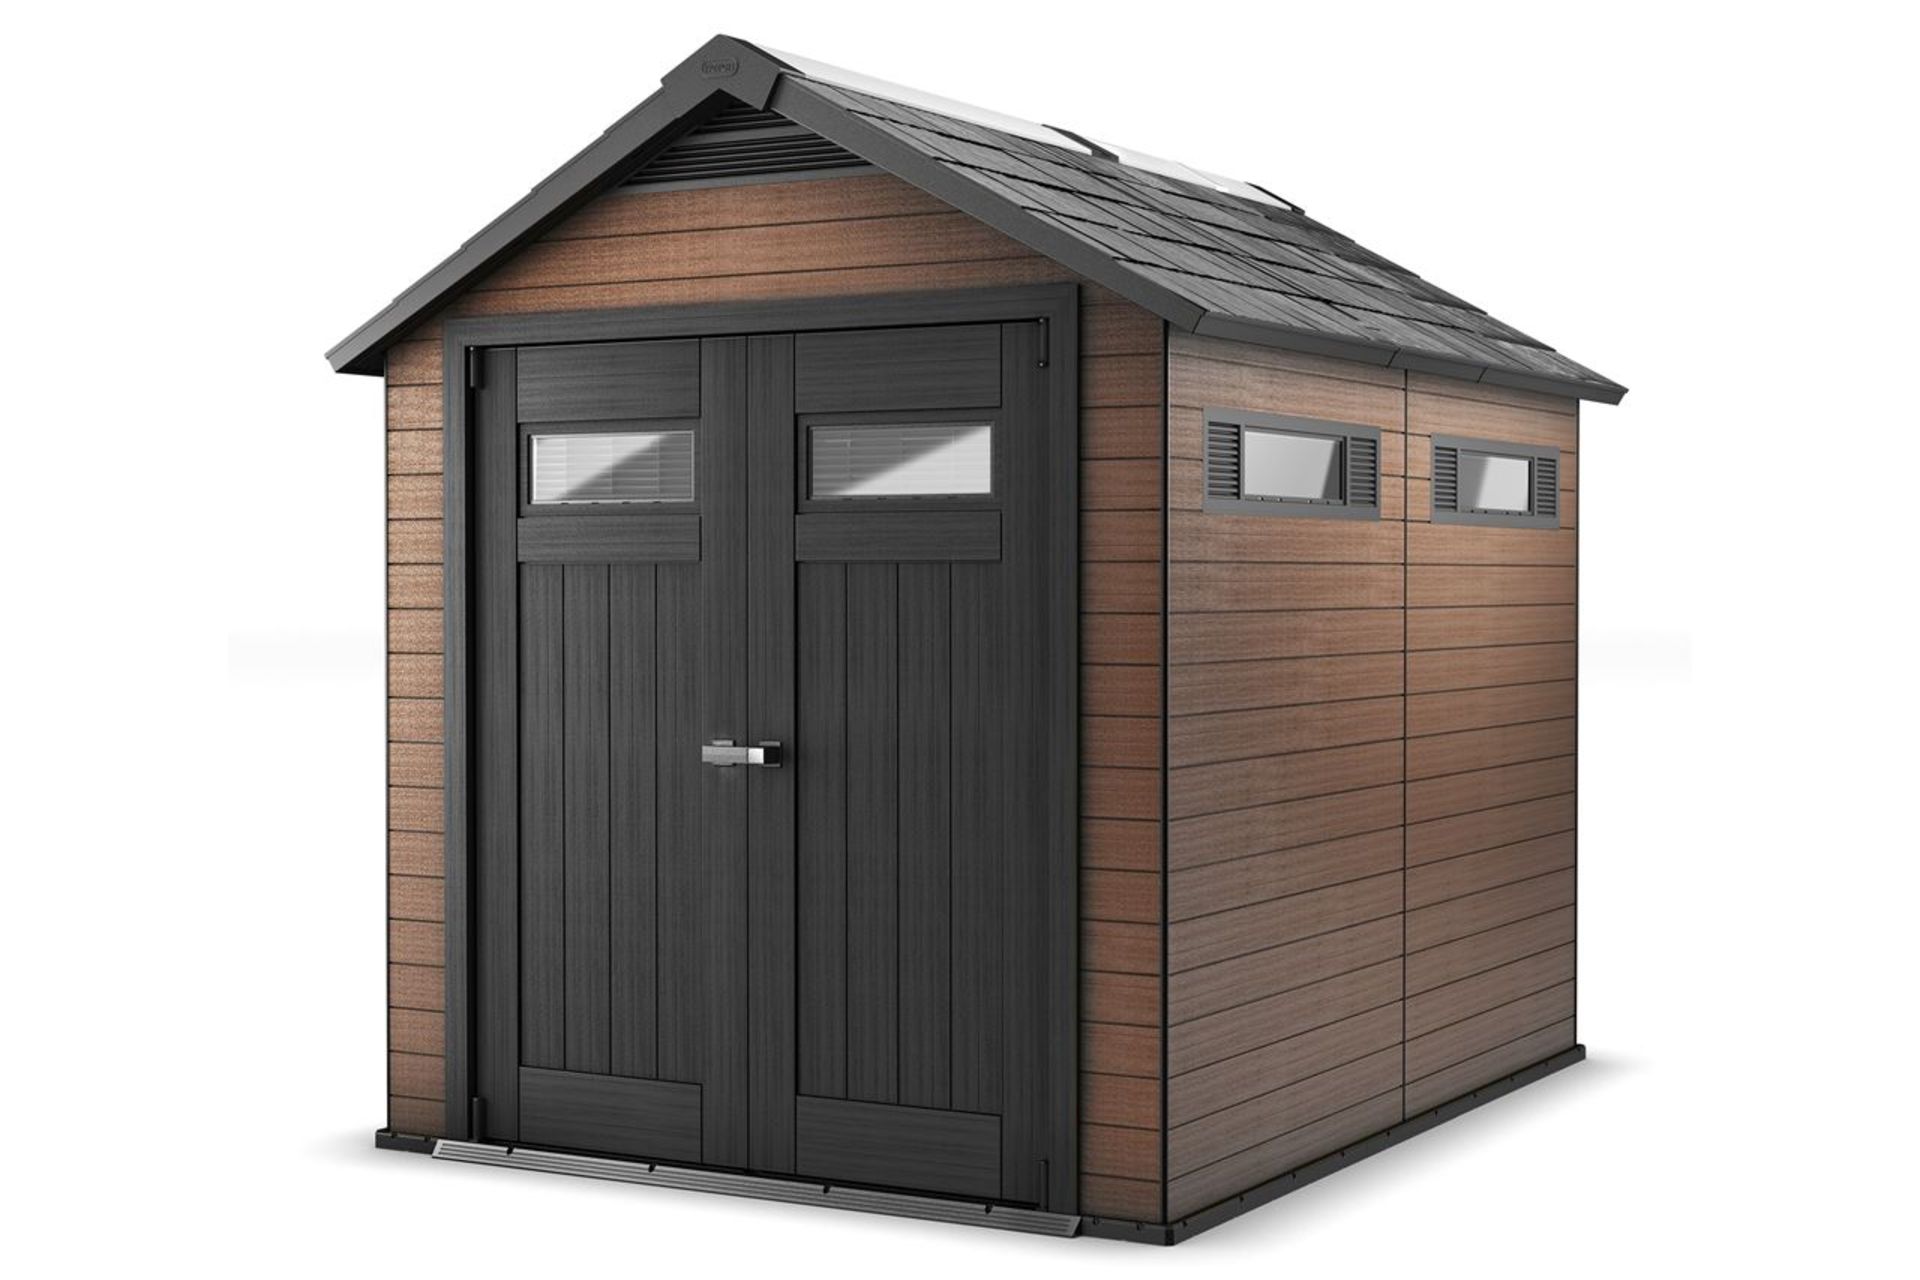 Keter Fusion 759 Shed RRP £1300 - Image 4 of 5